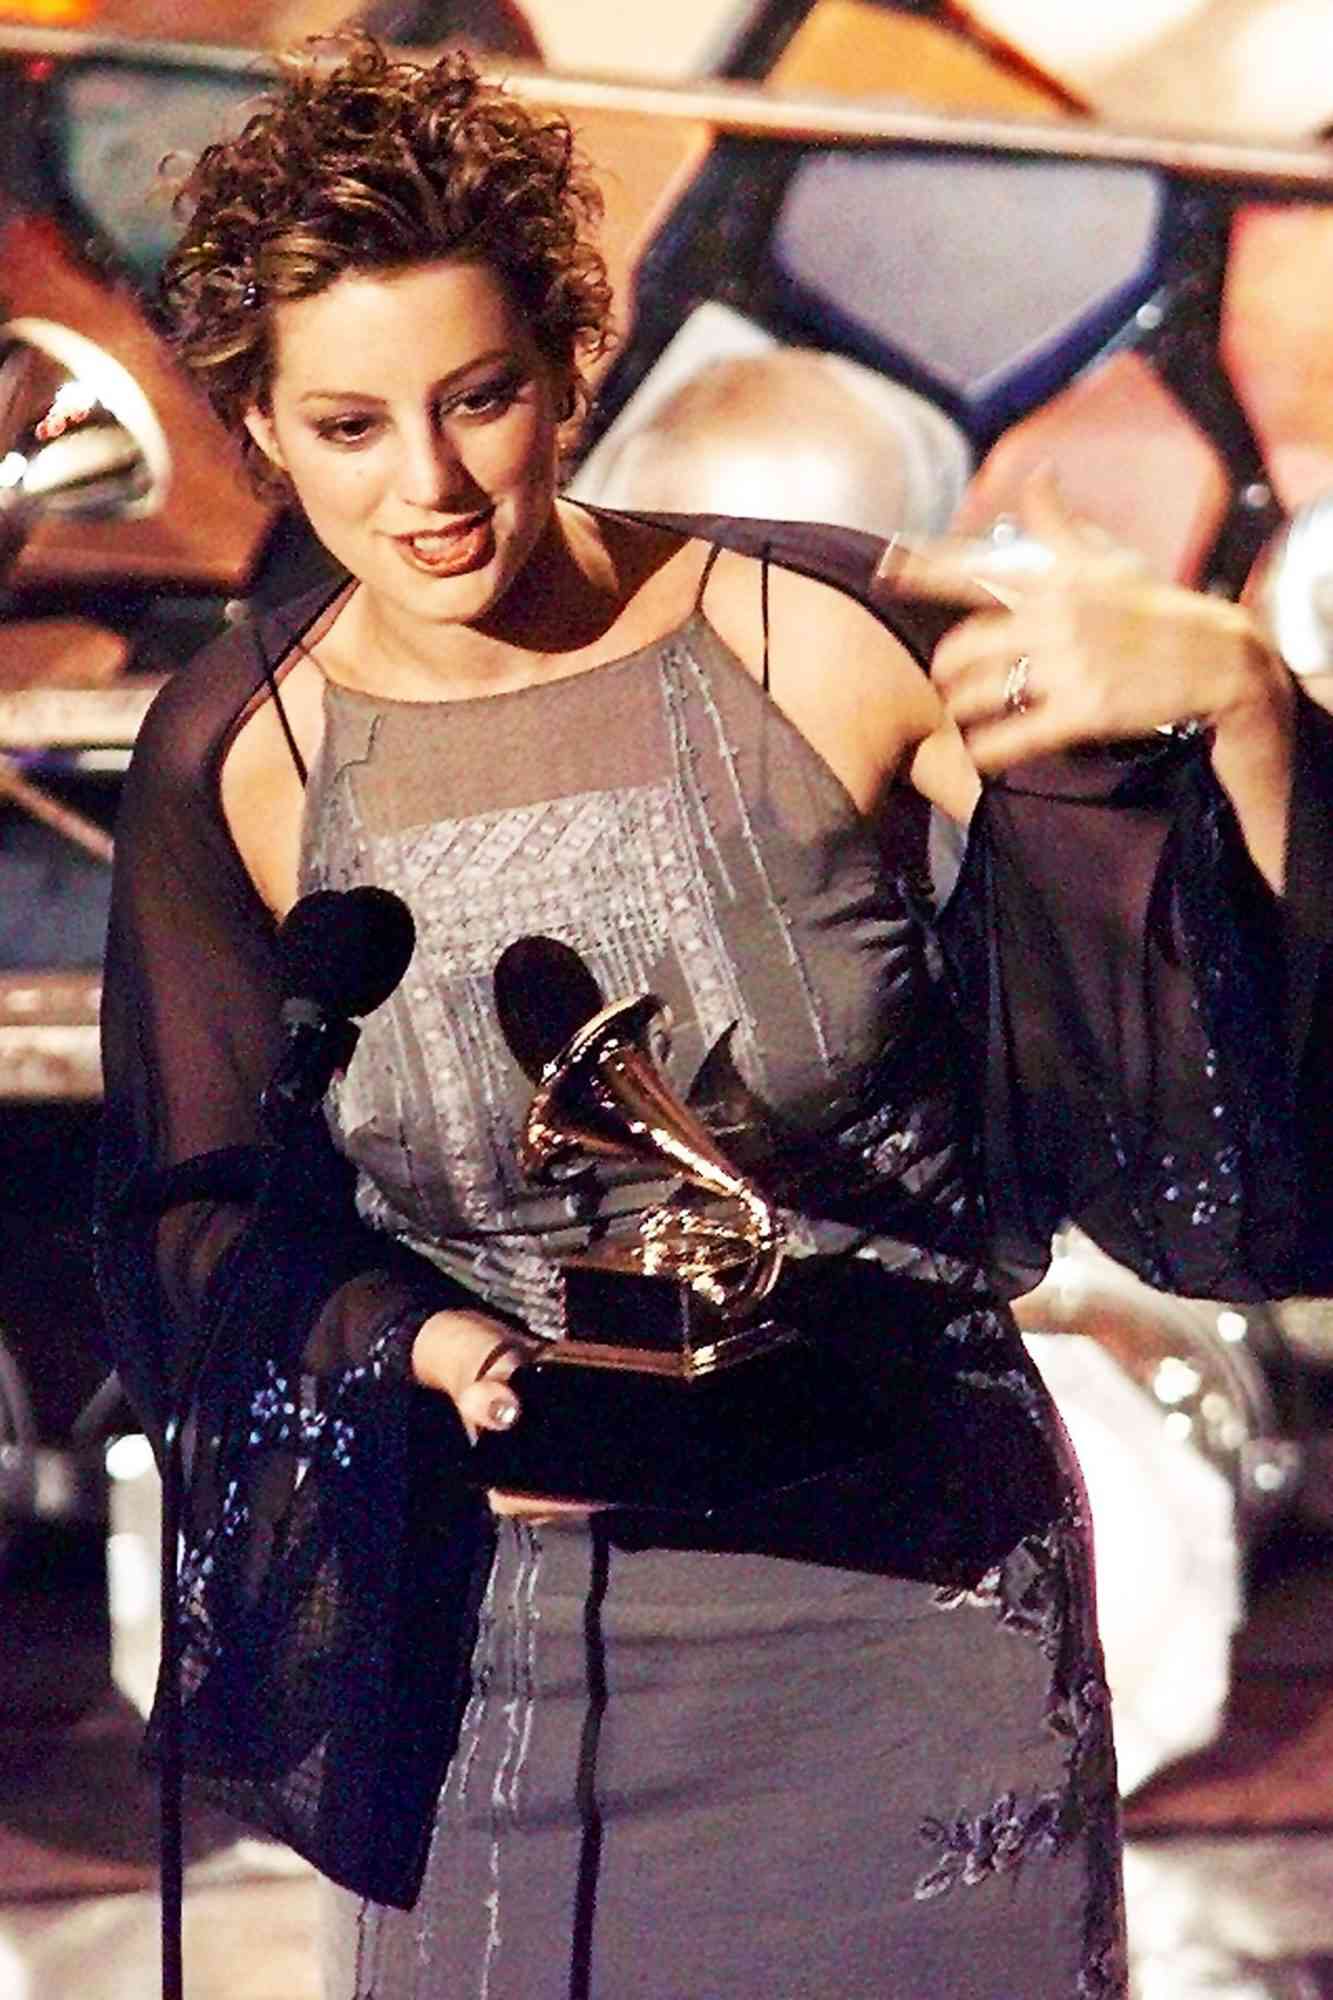 Sarah McLachlan holds up her Grammy Award for Best